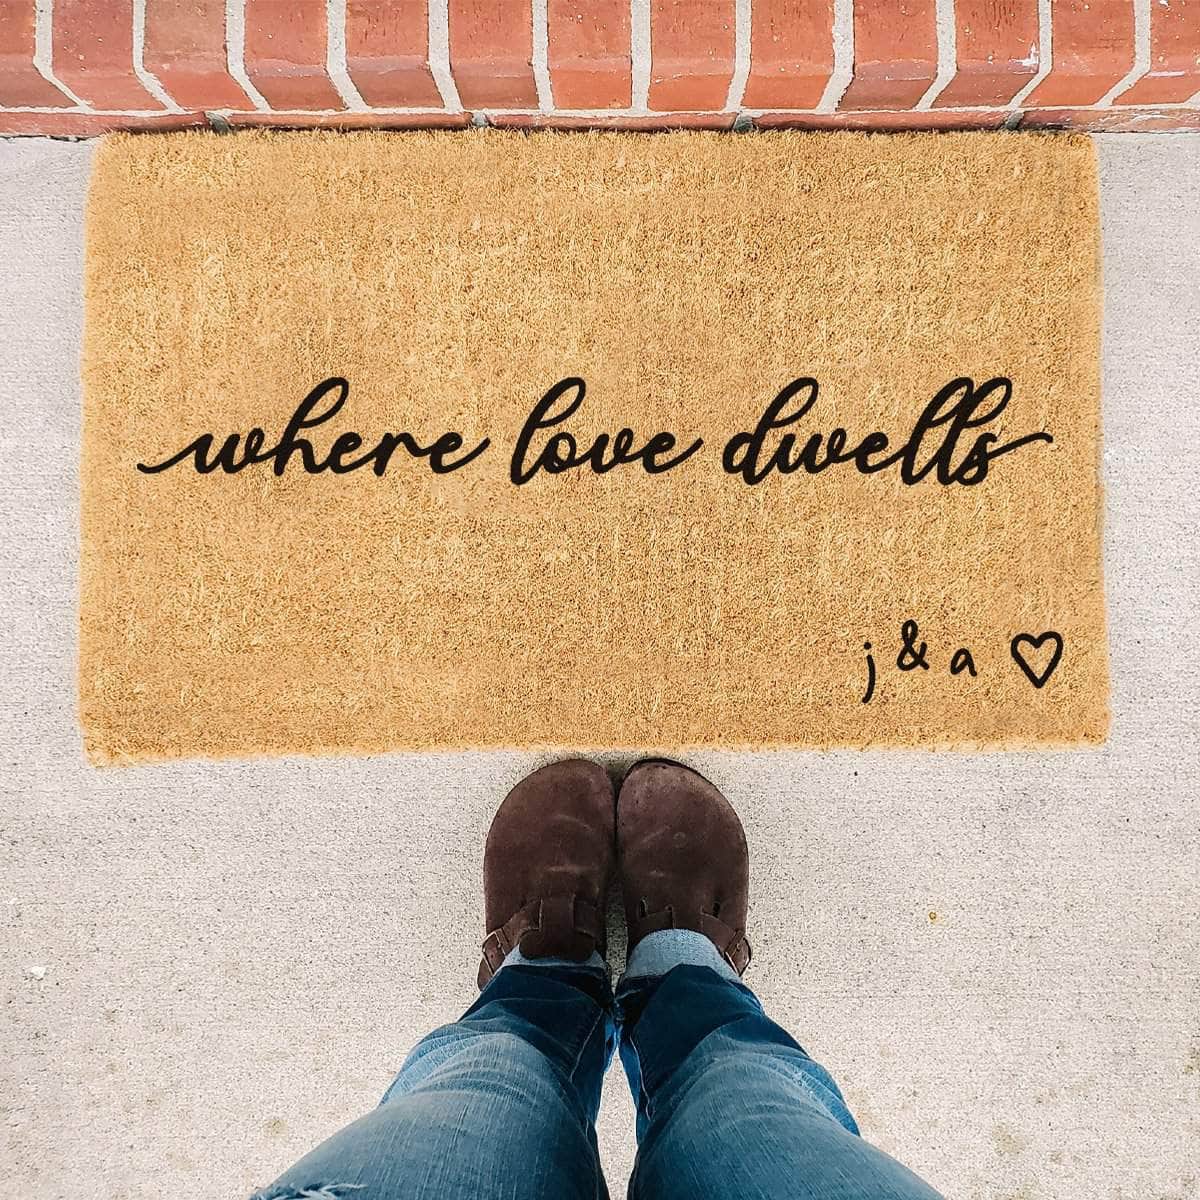 Where Love Dwells - Personalized Initials Doormat